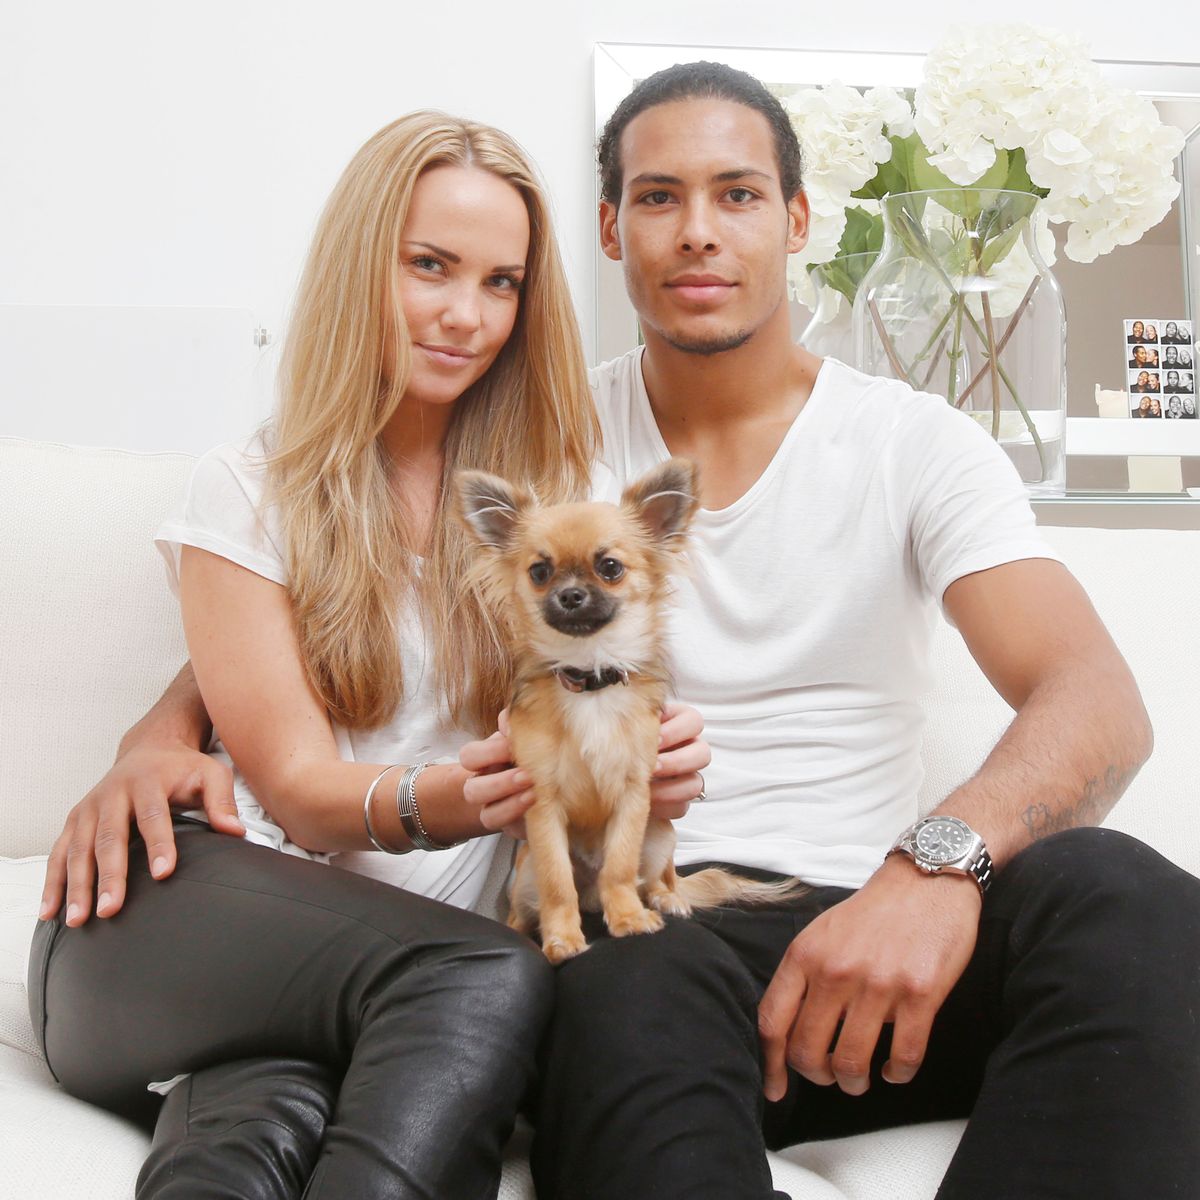 Celtic star Virgil van Dijk reveals how his stunning Dutch girlfriend has helped him settle in Glasgow - Daily Record